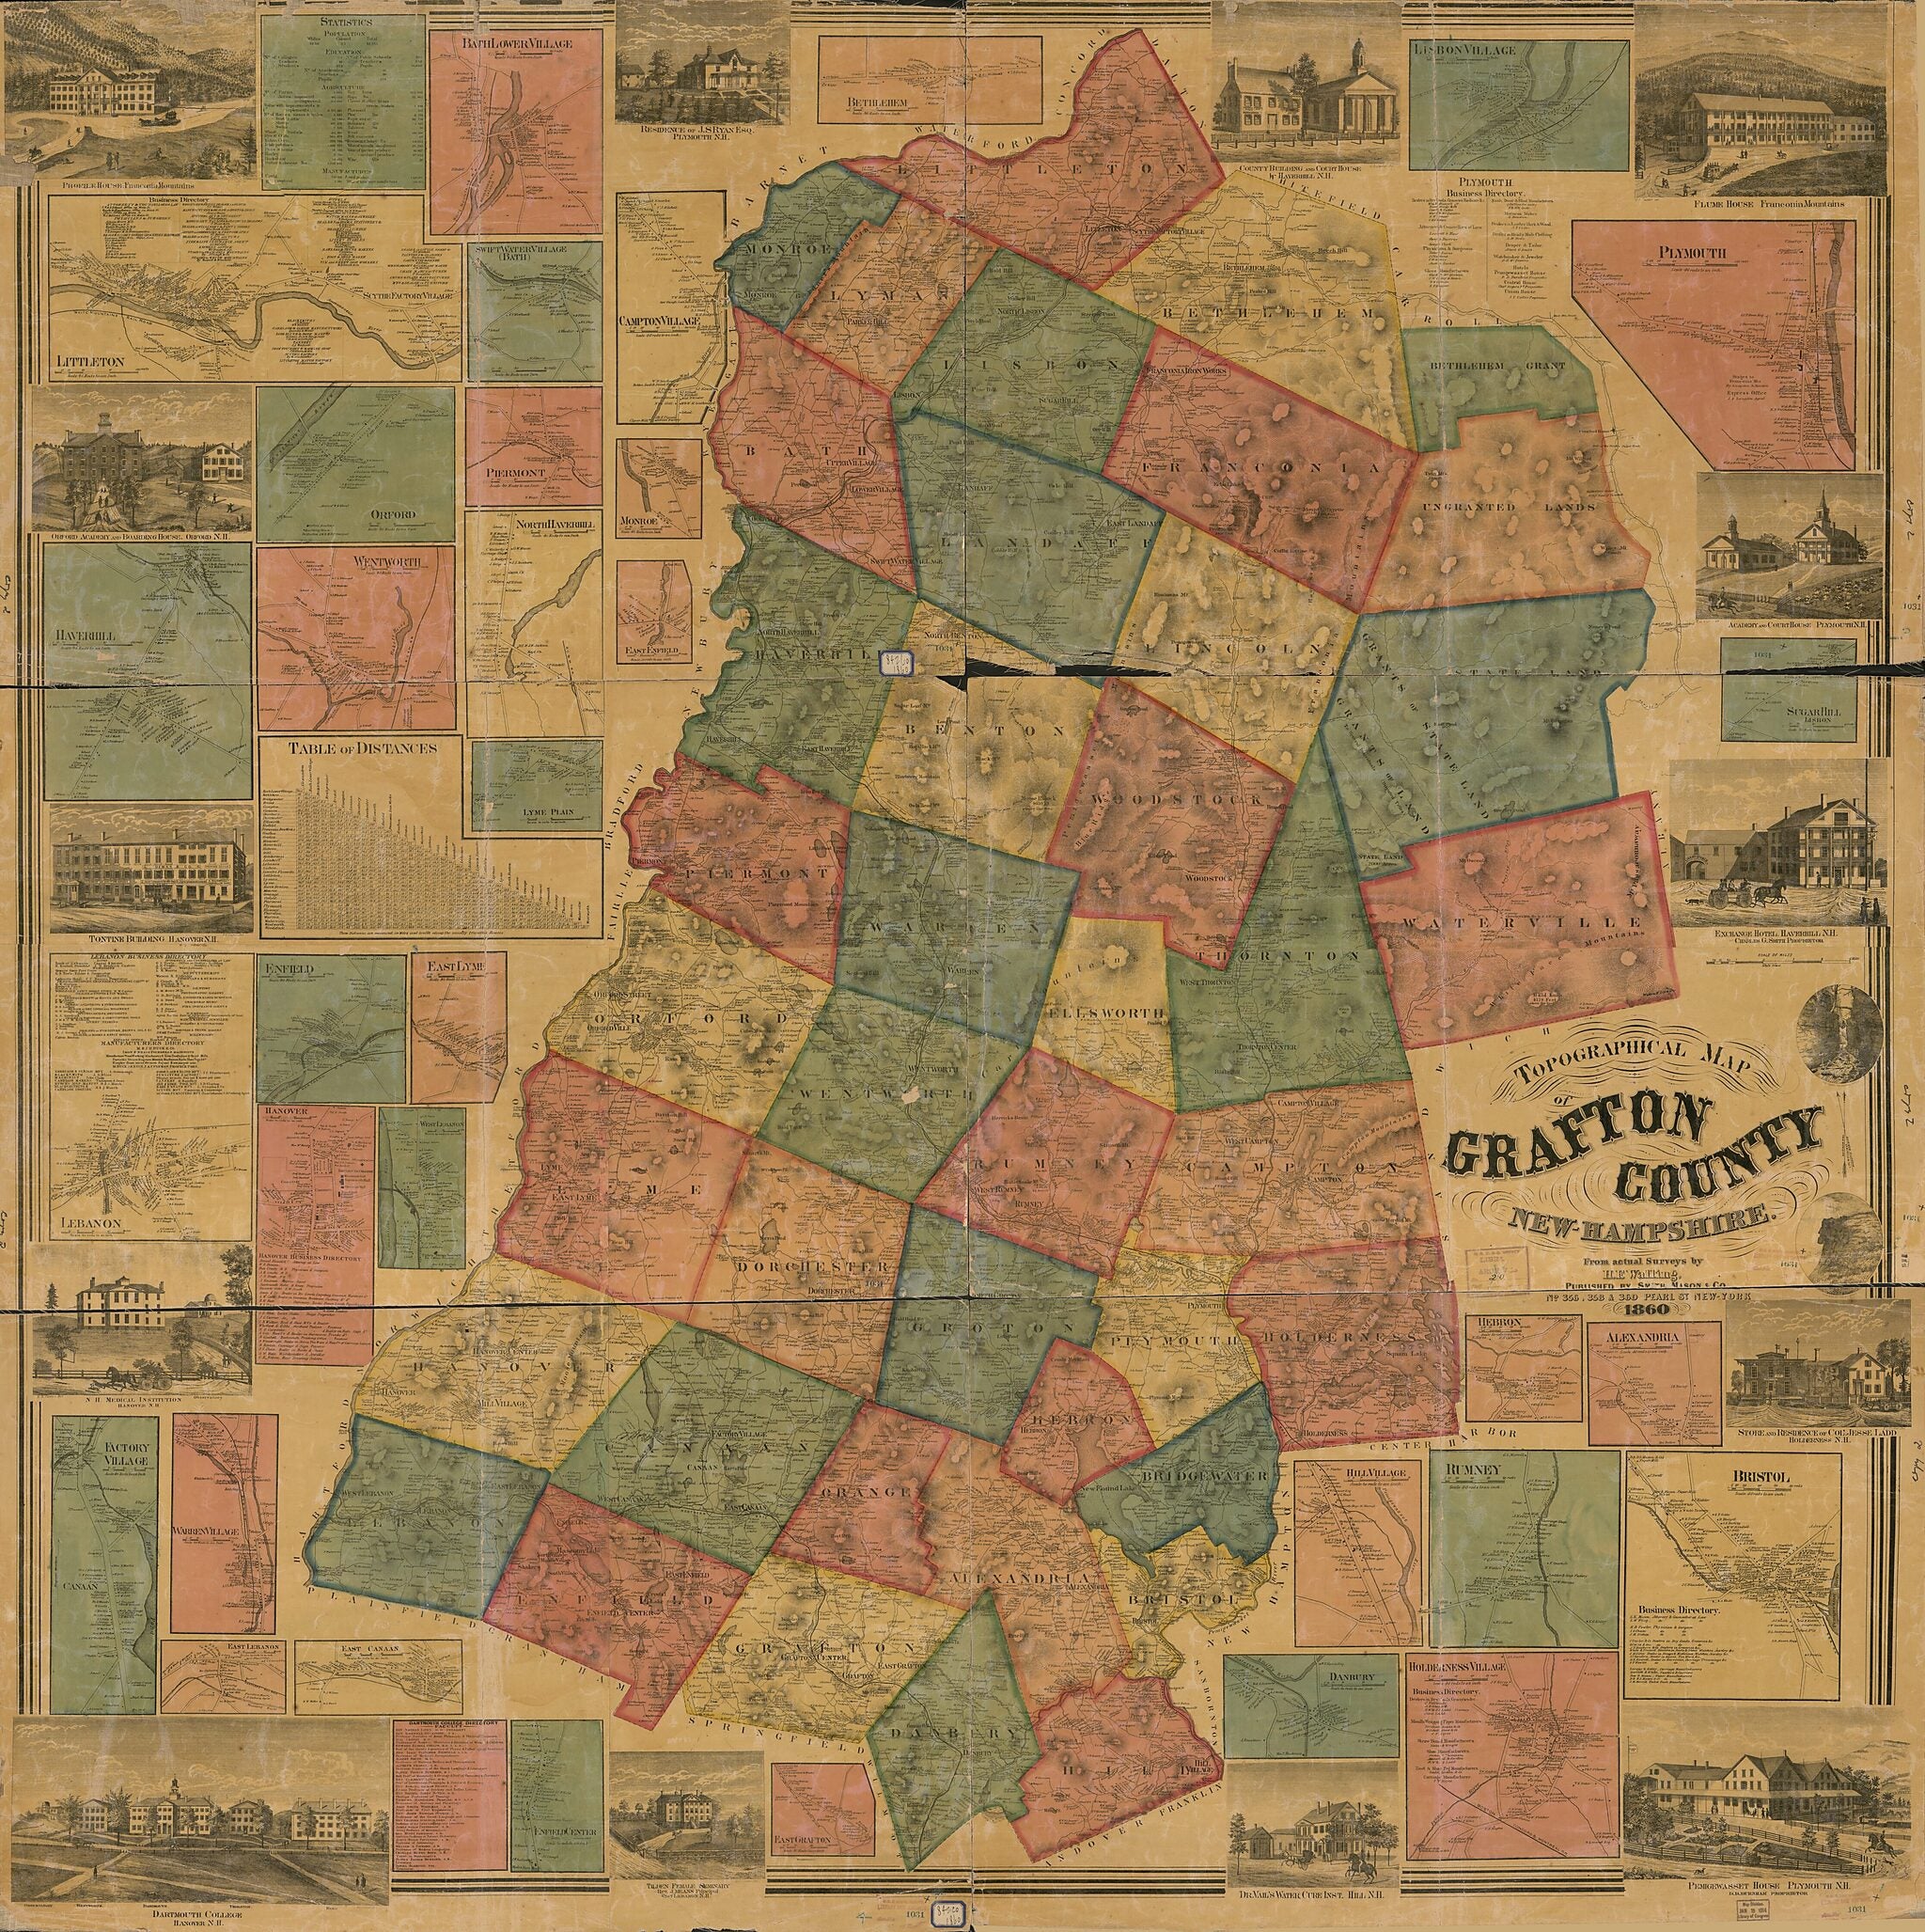 This old map of Topographical Map of Grafton County, New Hampshire (Grafton County, New Hampshire) from 1860 was created by Mason &amp; Co Smith, Henry Francis Walling in 1860